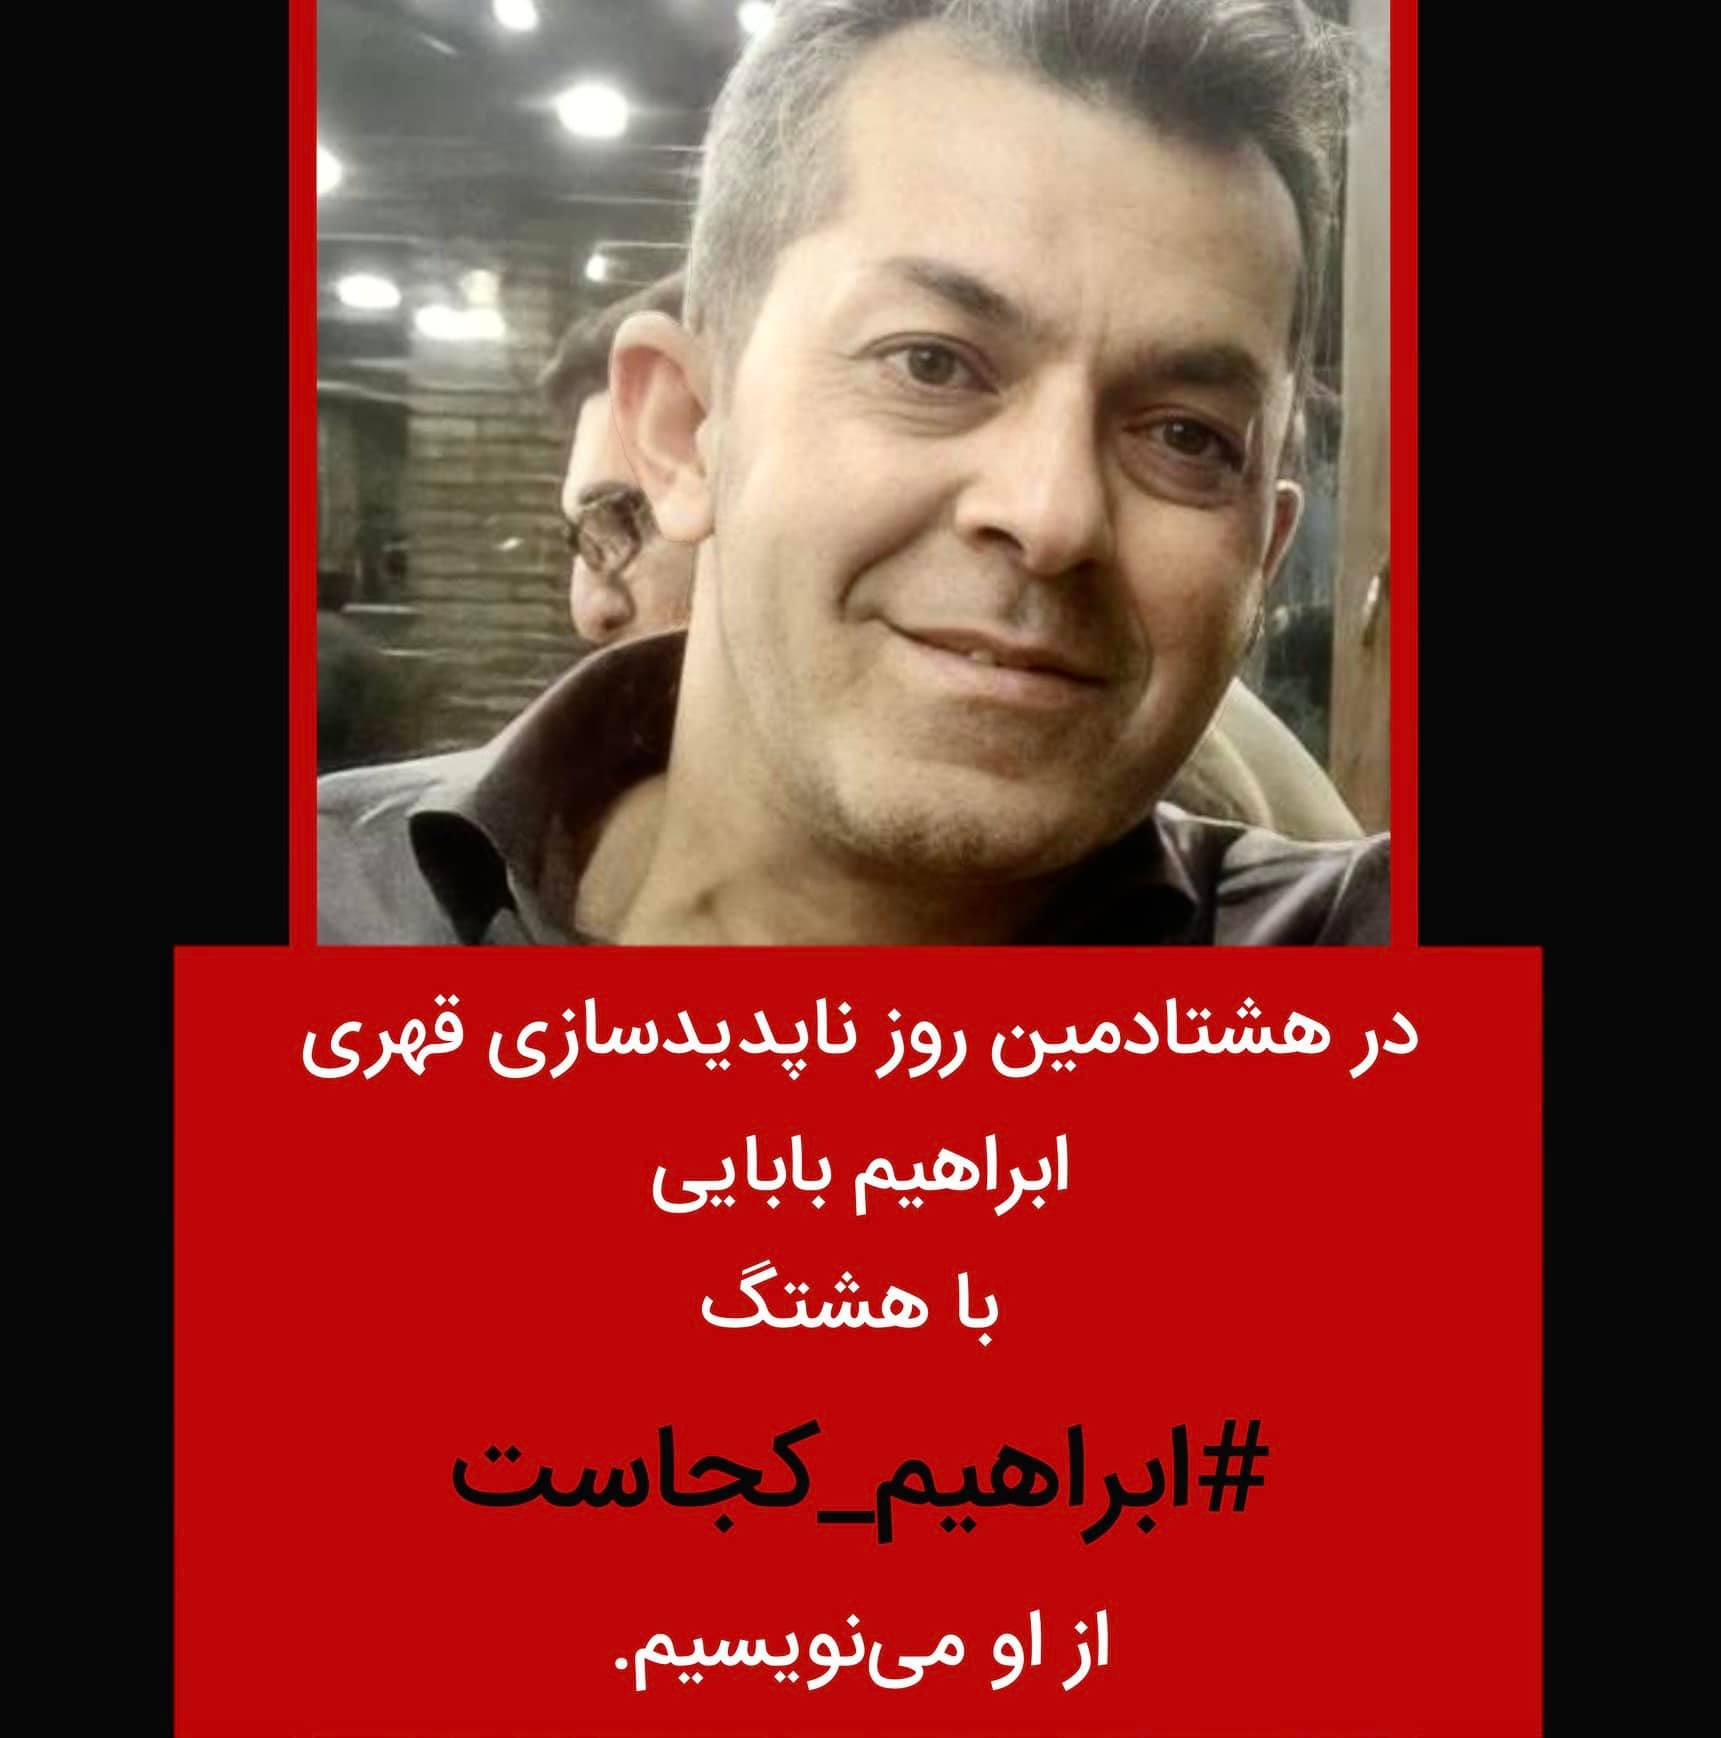 Campaign to find Ebrahim Babaei, who has been missing for 80 days